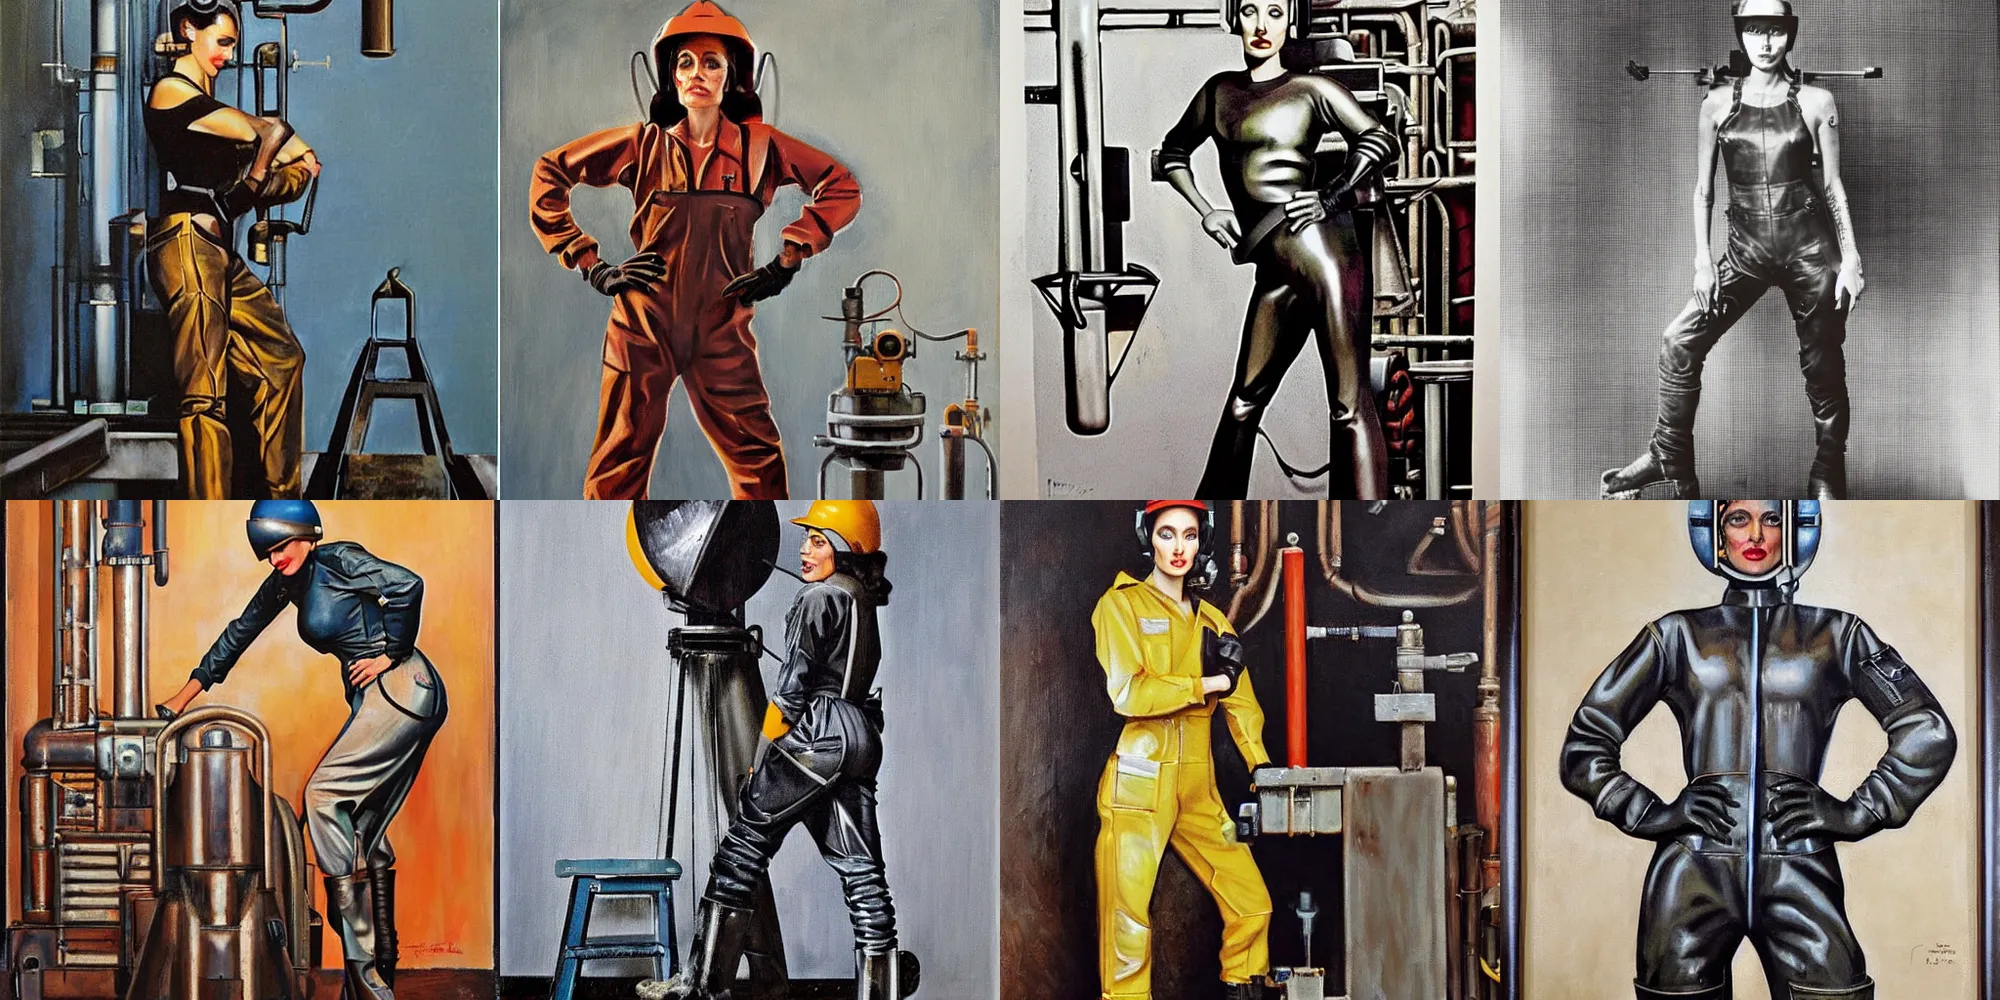 Prompt: symmetrical oil painting of full - body angelina jolie posing in steelworker welder costume by percevel rockwell - 1 9 3 0 s